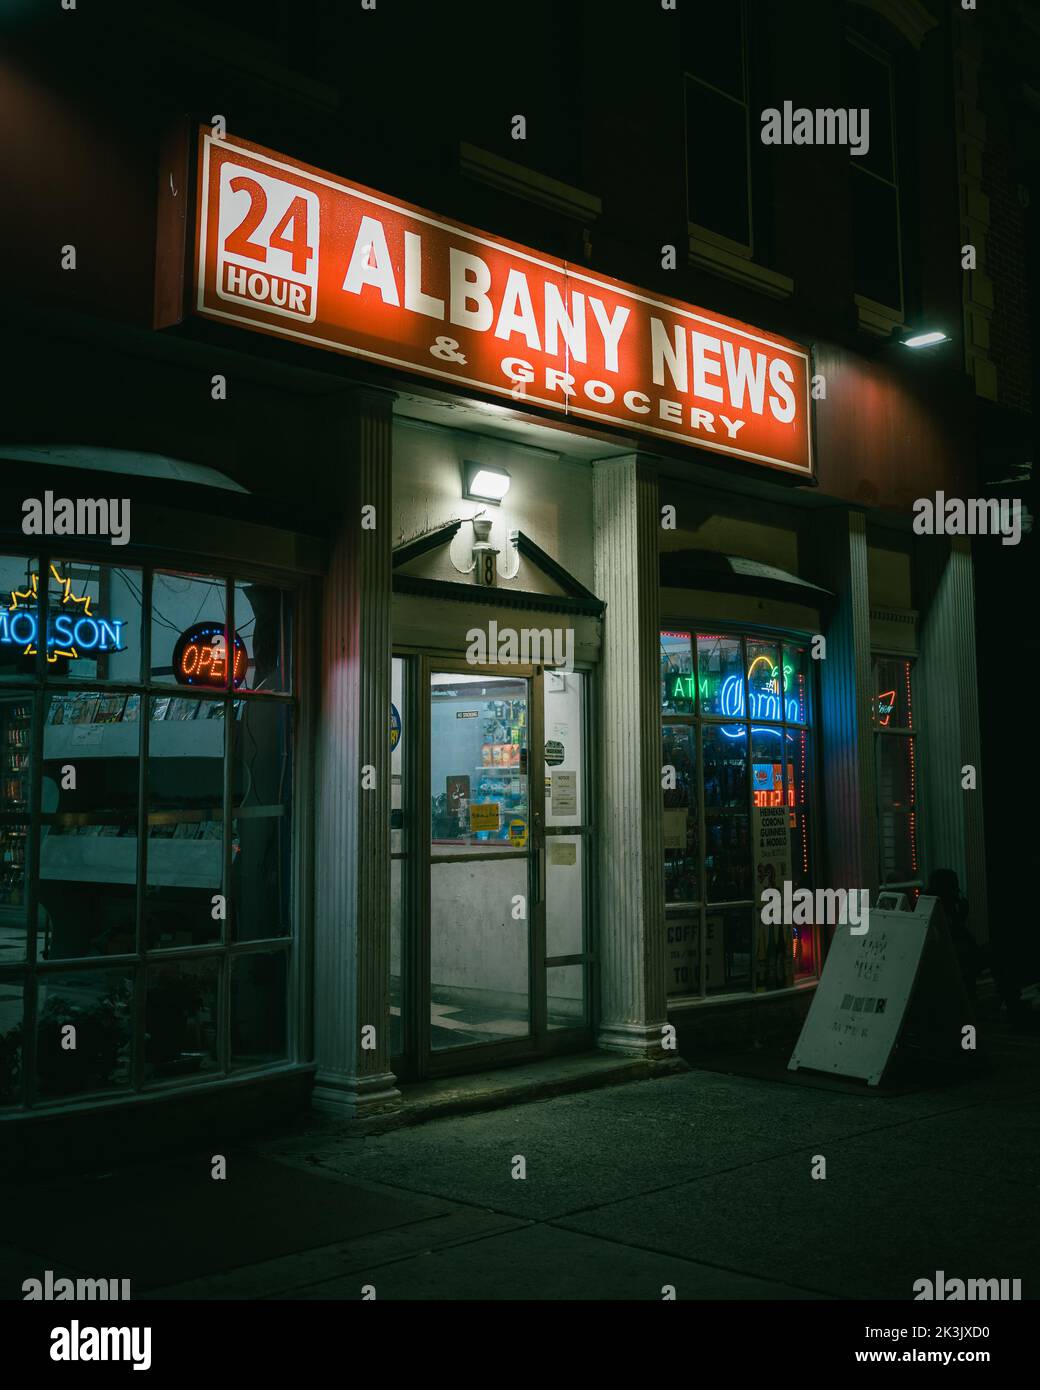 24 Hour Albany News und Grocery sign at Night, Albany, New York Stockfoto